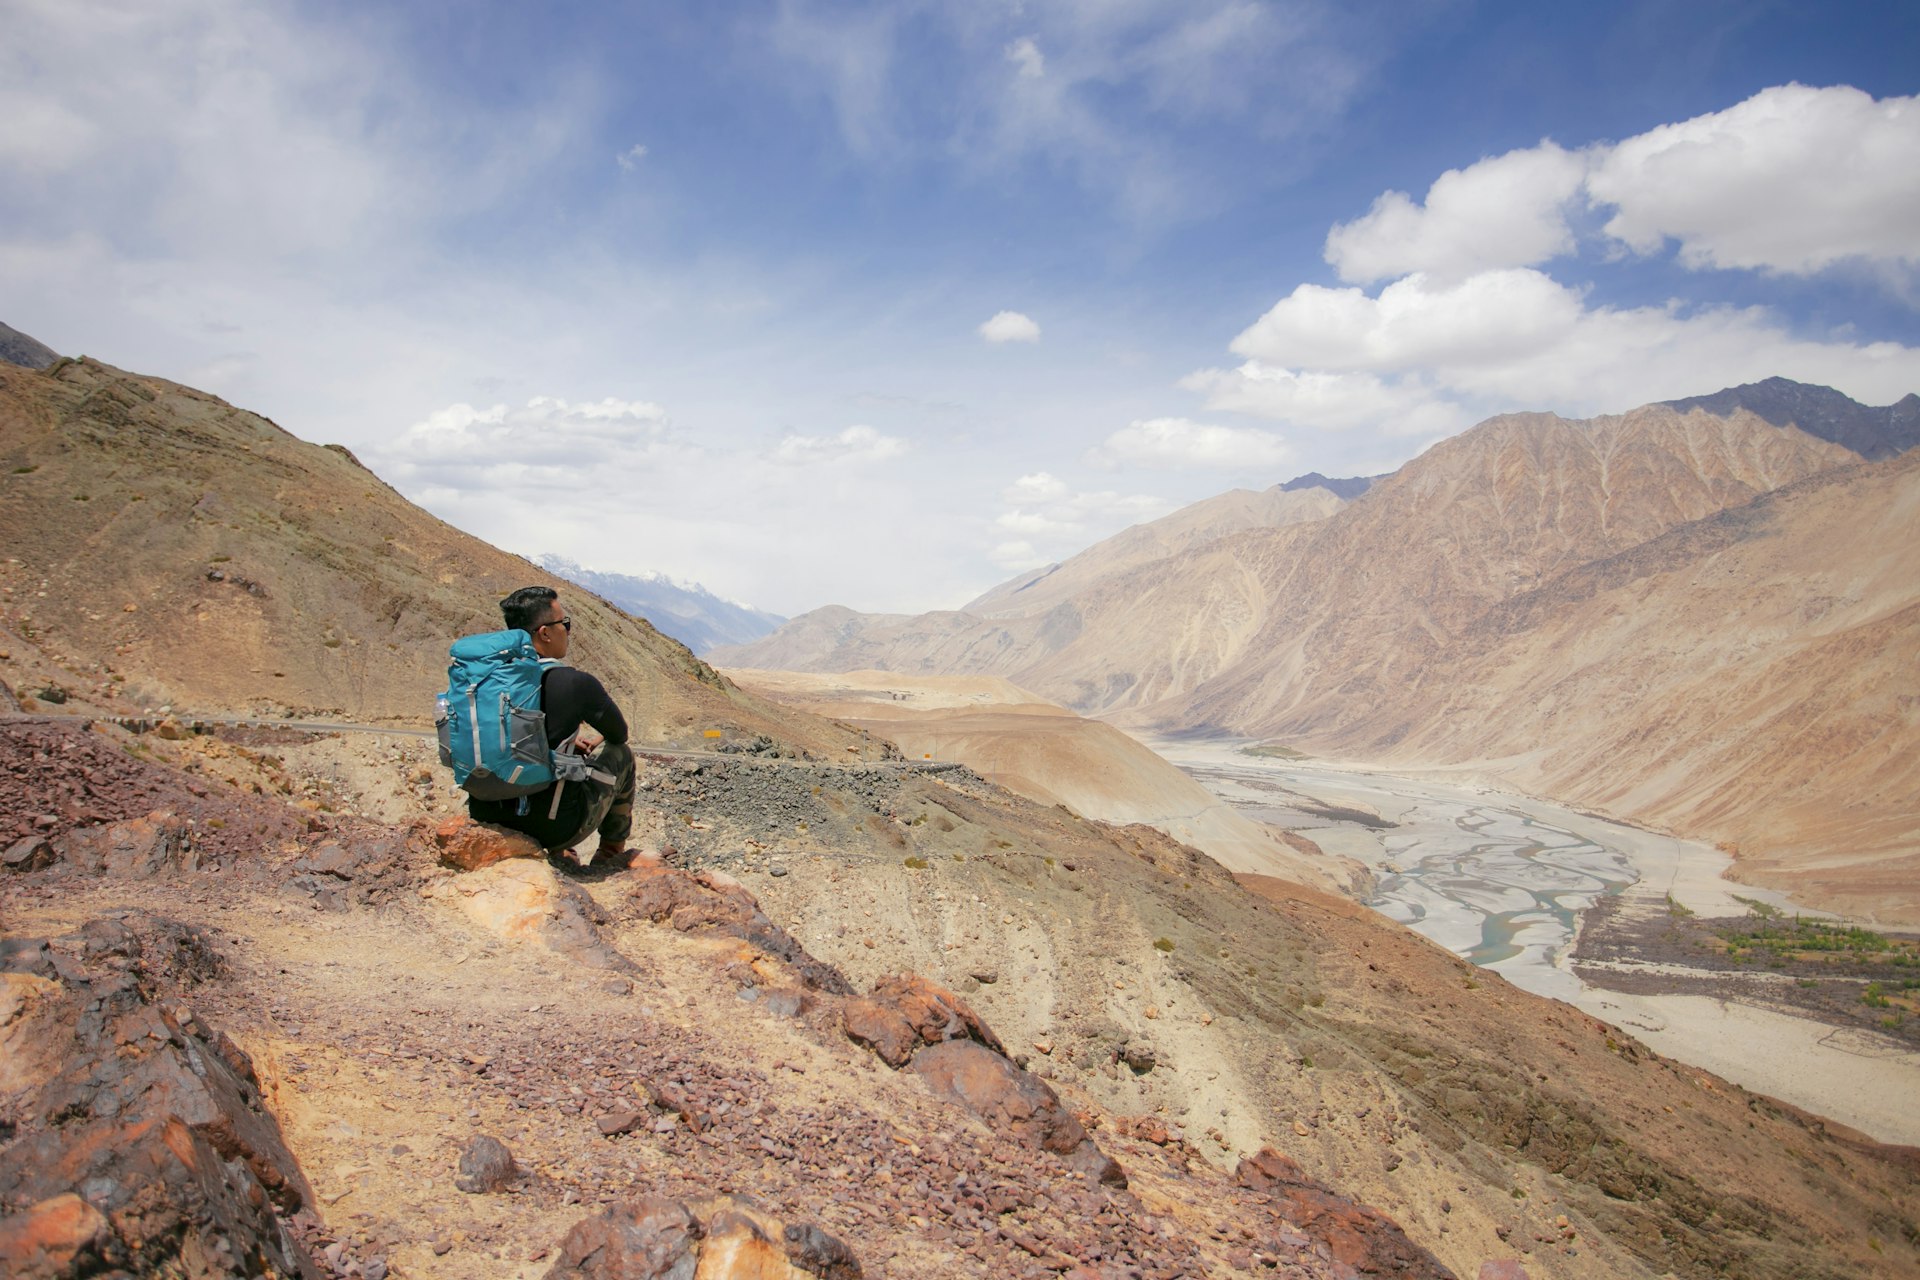 A man sits on the side of a red rock mountain in the Indian Himalayas